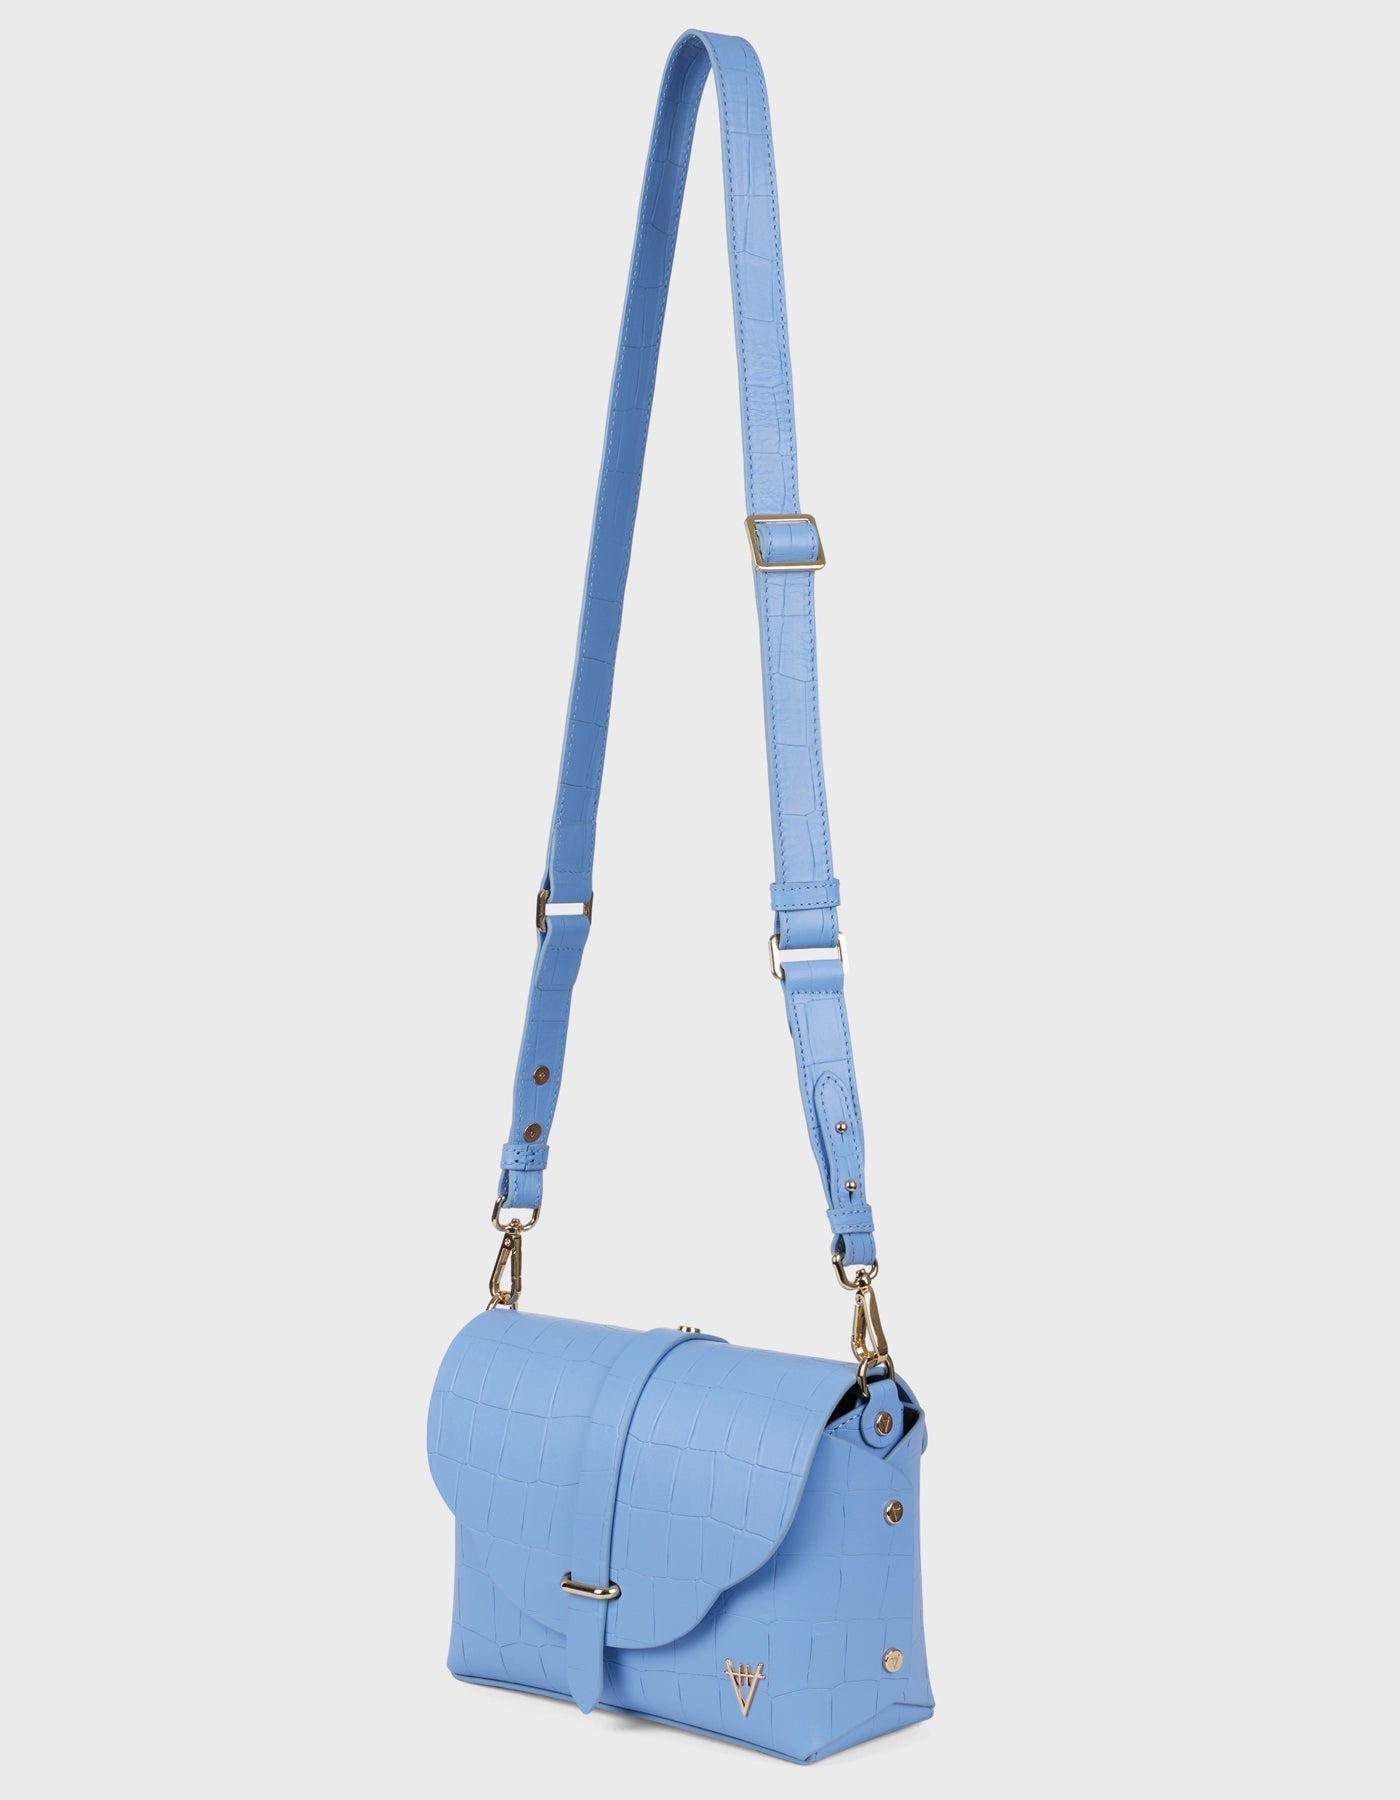 Hiva Atelier | Harmonia Shoulder Bag Croco Effect Tranquil Blue | Beautiful and Versatile Leather Accessories